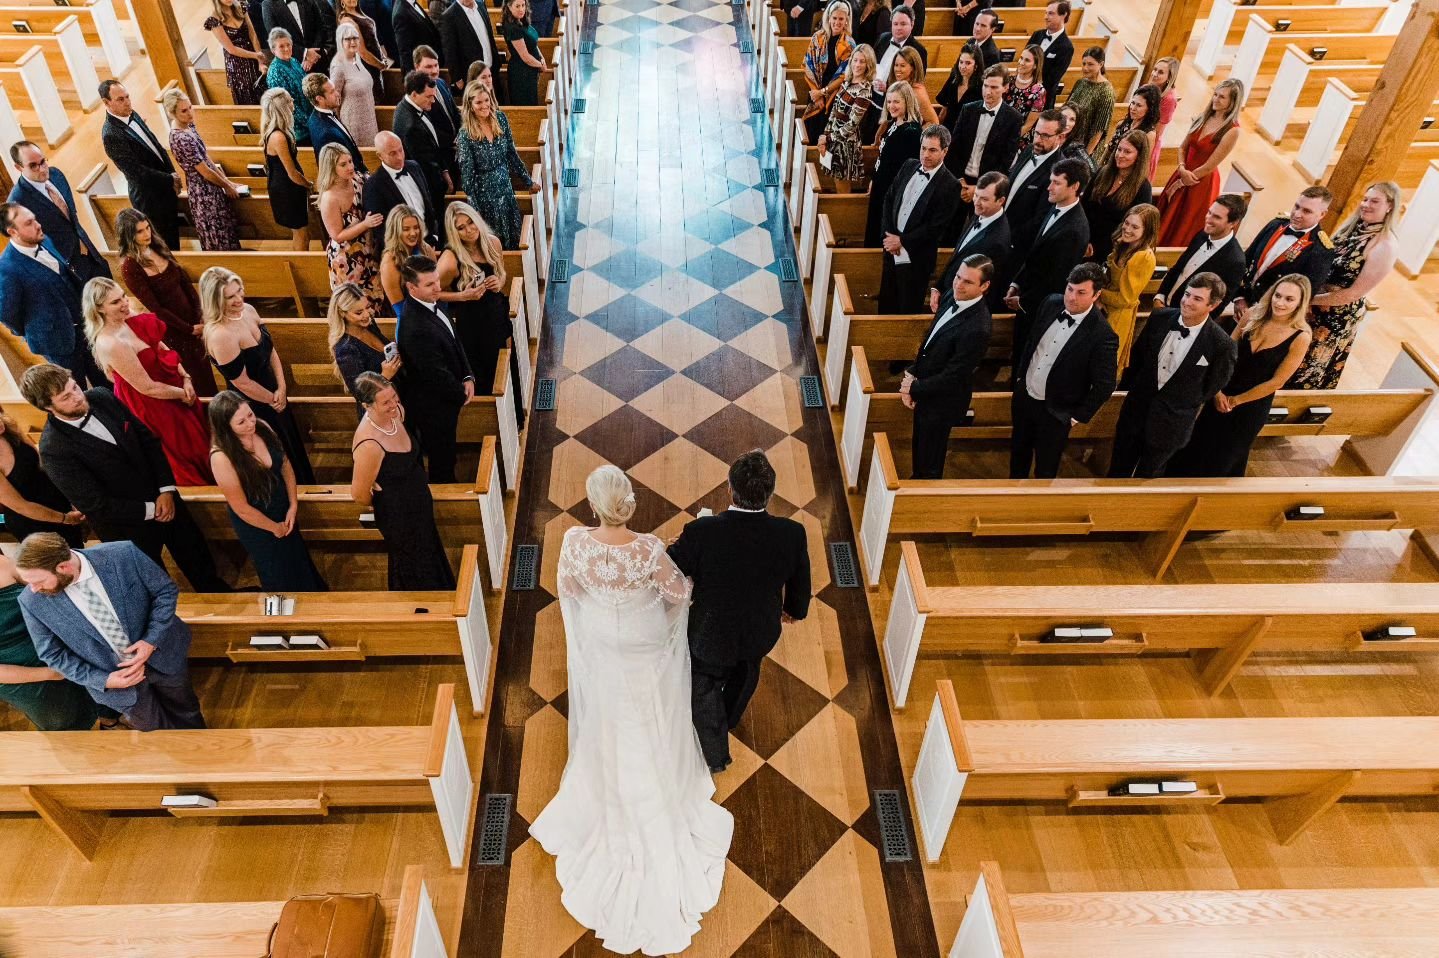 The best moment. The moment she arrives in the aisle!

#virginiaphotograper #charlottesvilleweddingphotographer #charlottesvillephotographer #charlottewedding #virginiawedding #dcweddings #southernwedding #roanokeweddingphotographer #raleighweddingph